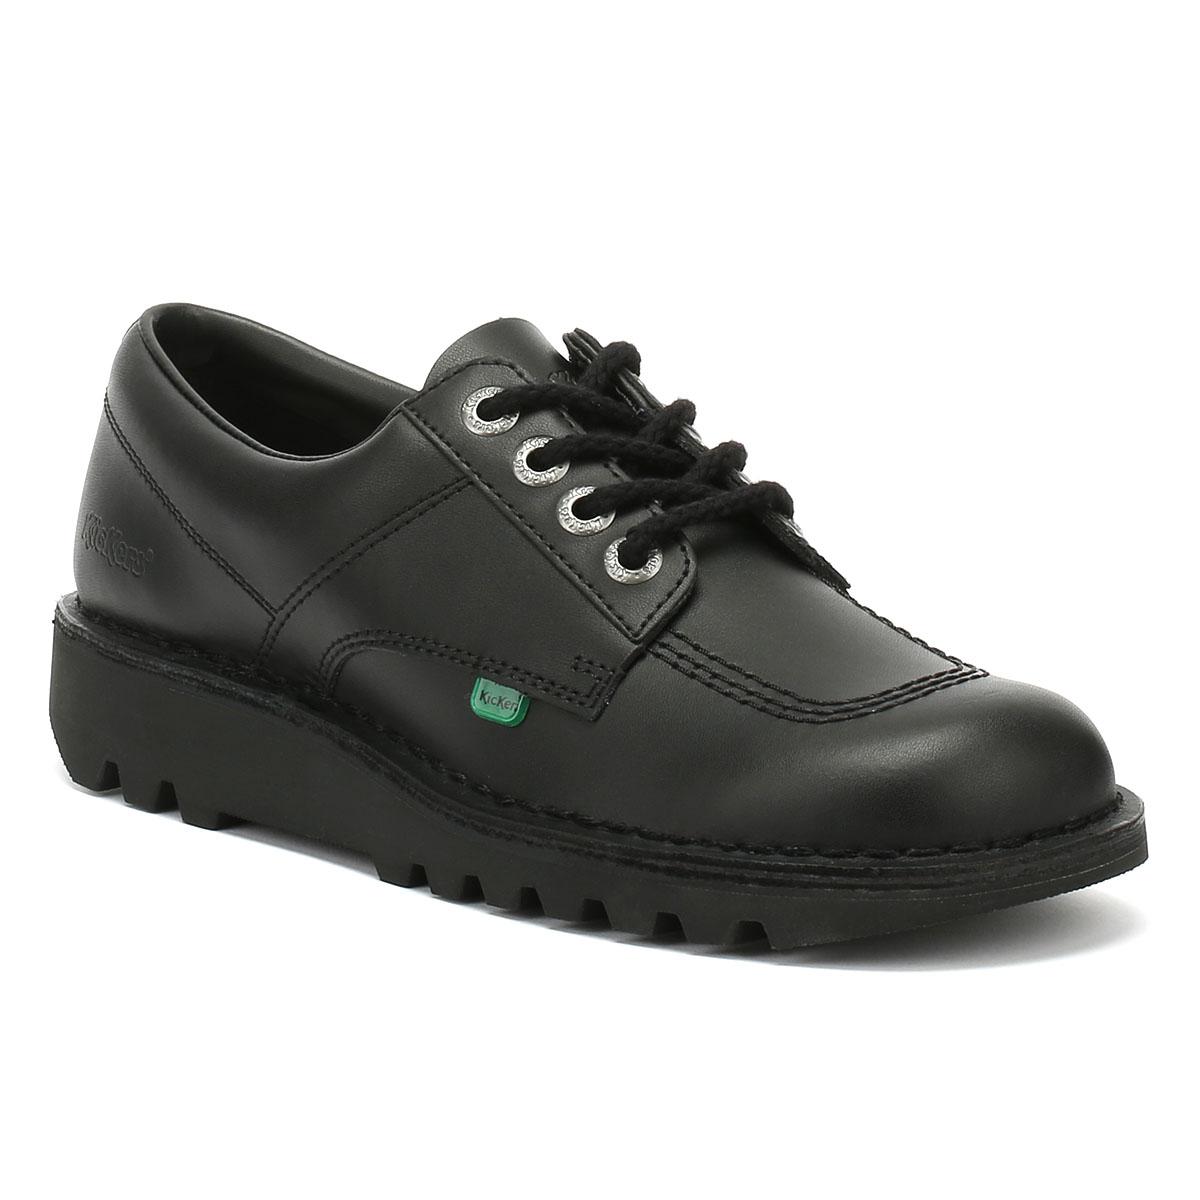 Kickers Mens Kick Lo Black Leather Shoes for Men - Lyst